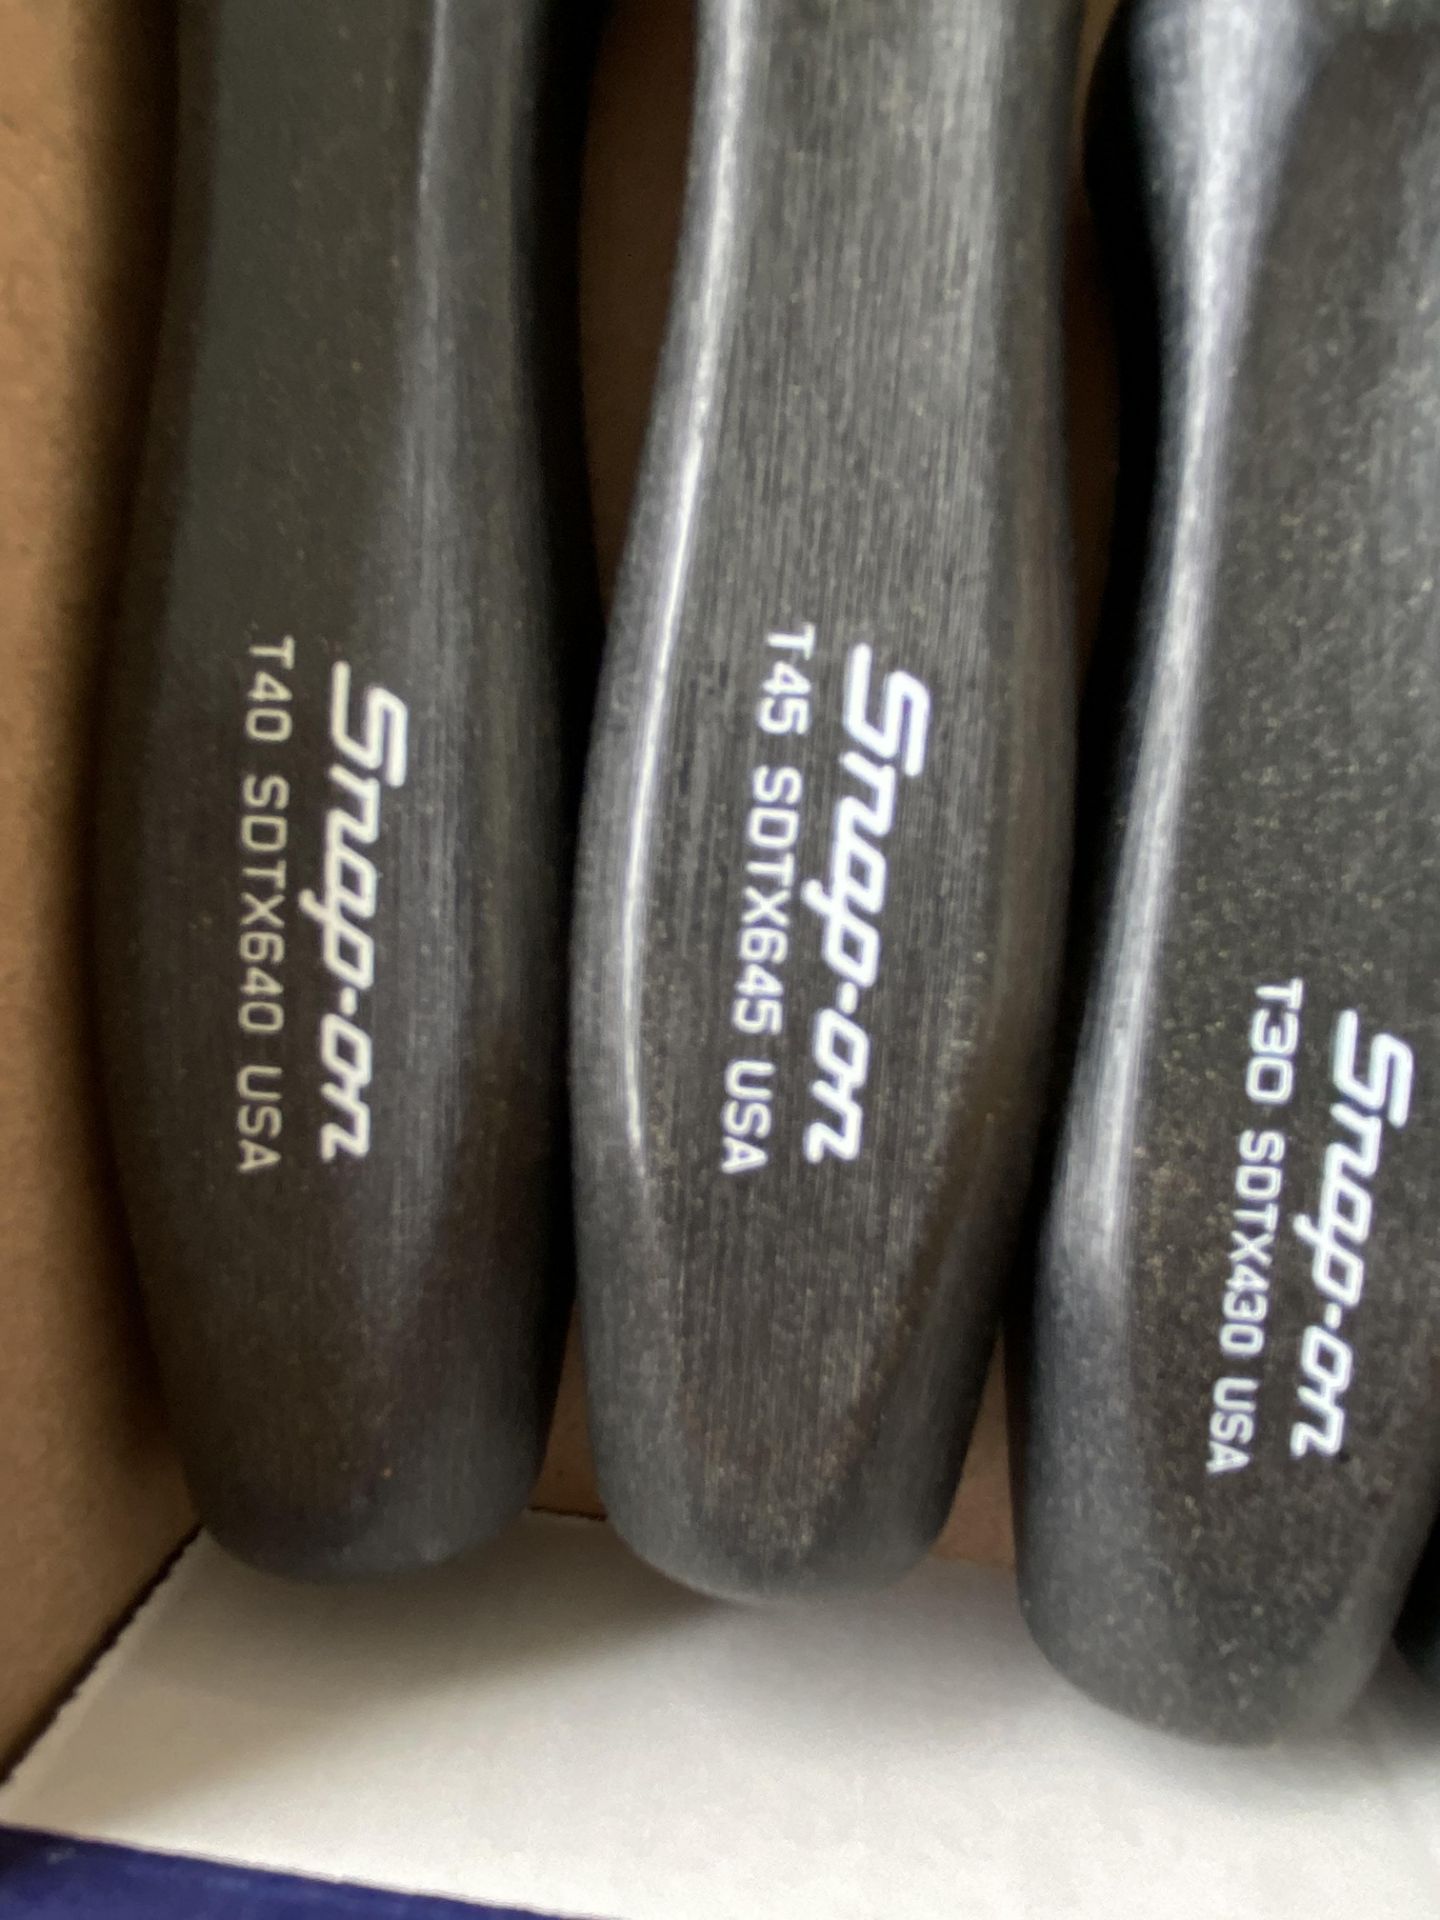 SNAP-ON TORQUE SCREWDRIVERS - Image 2 of 2